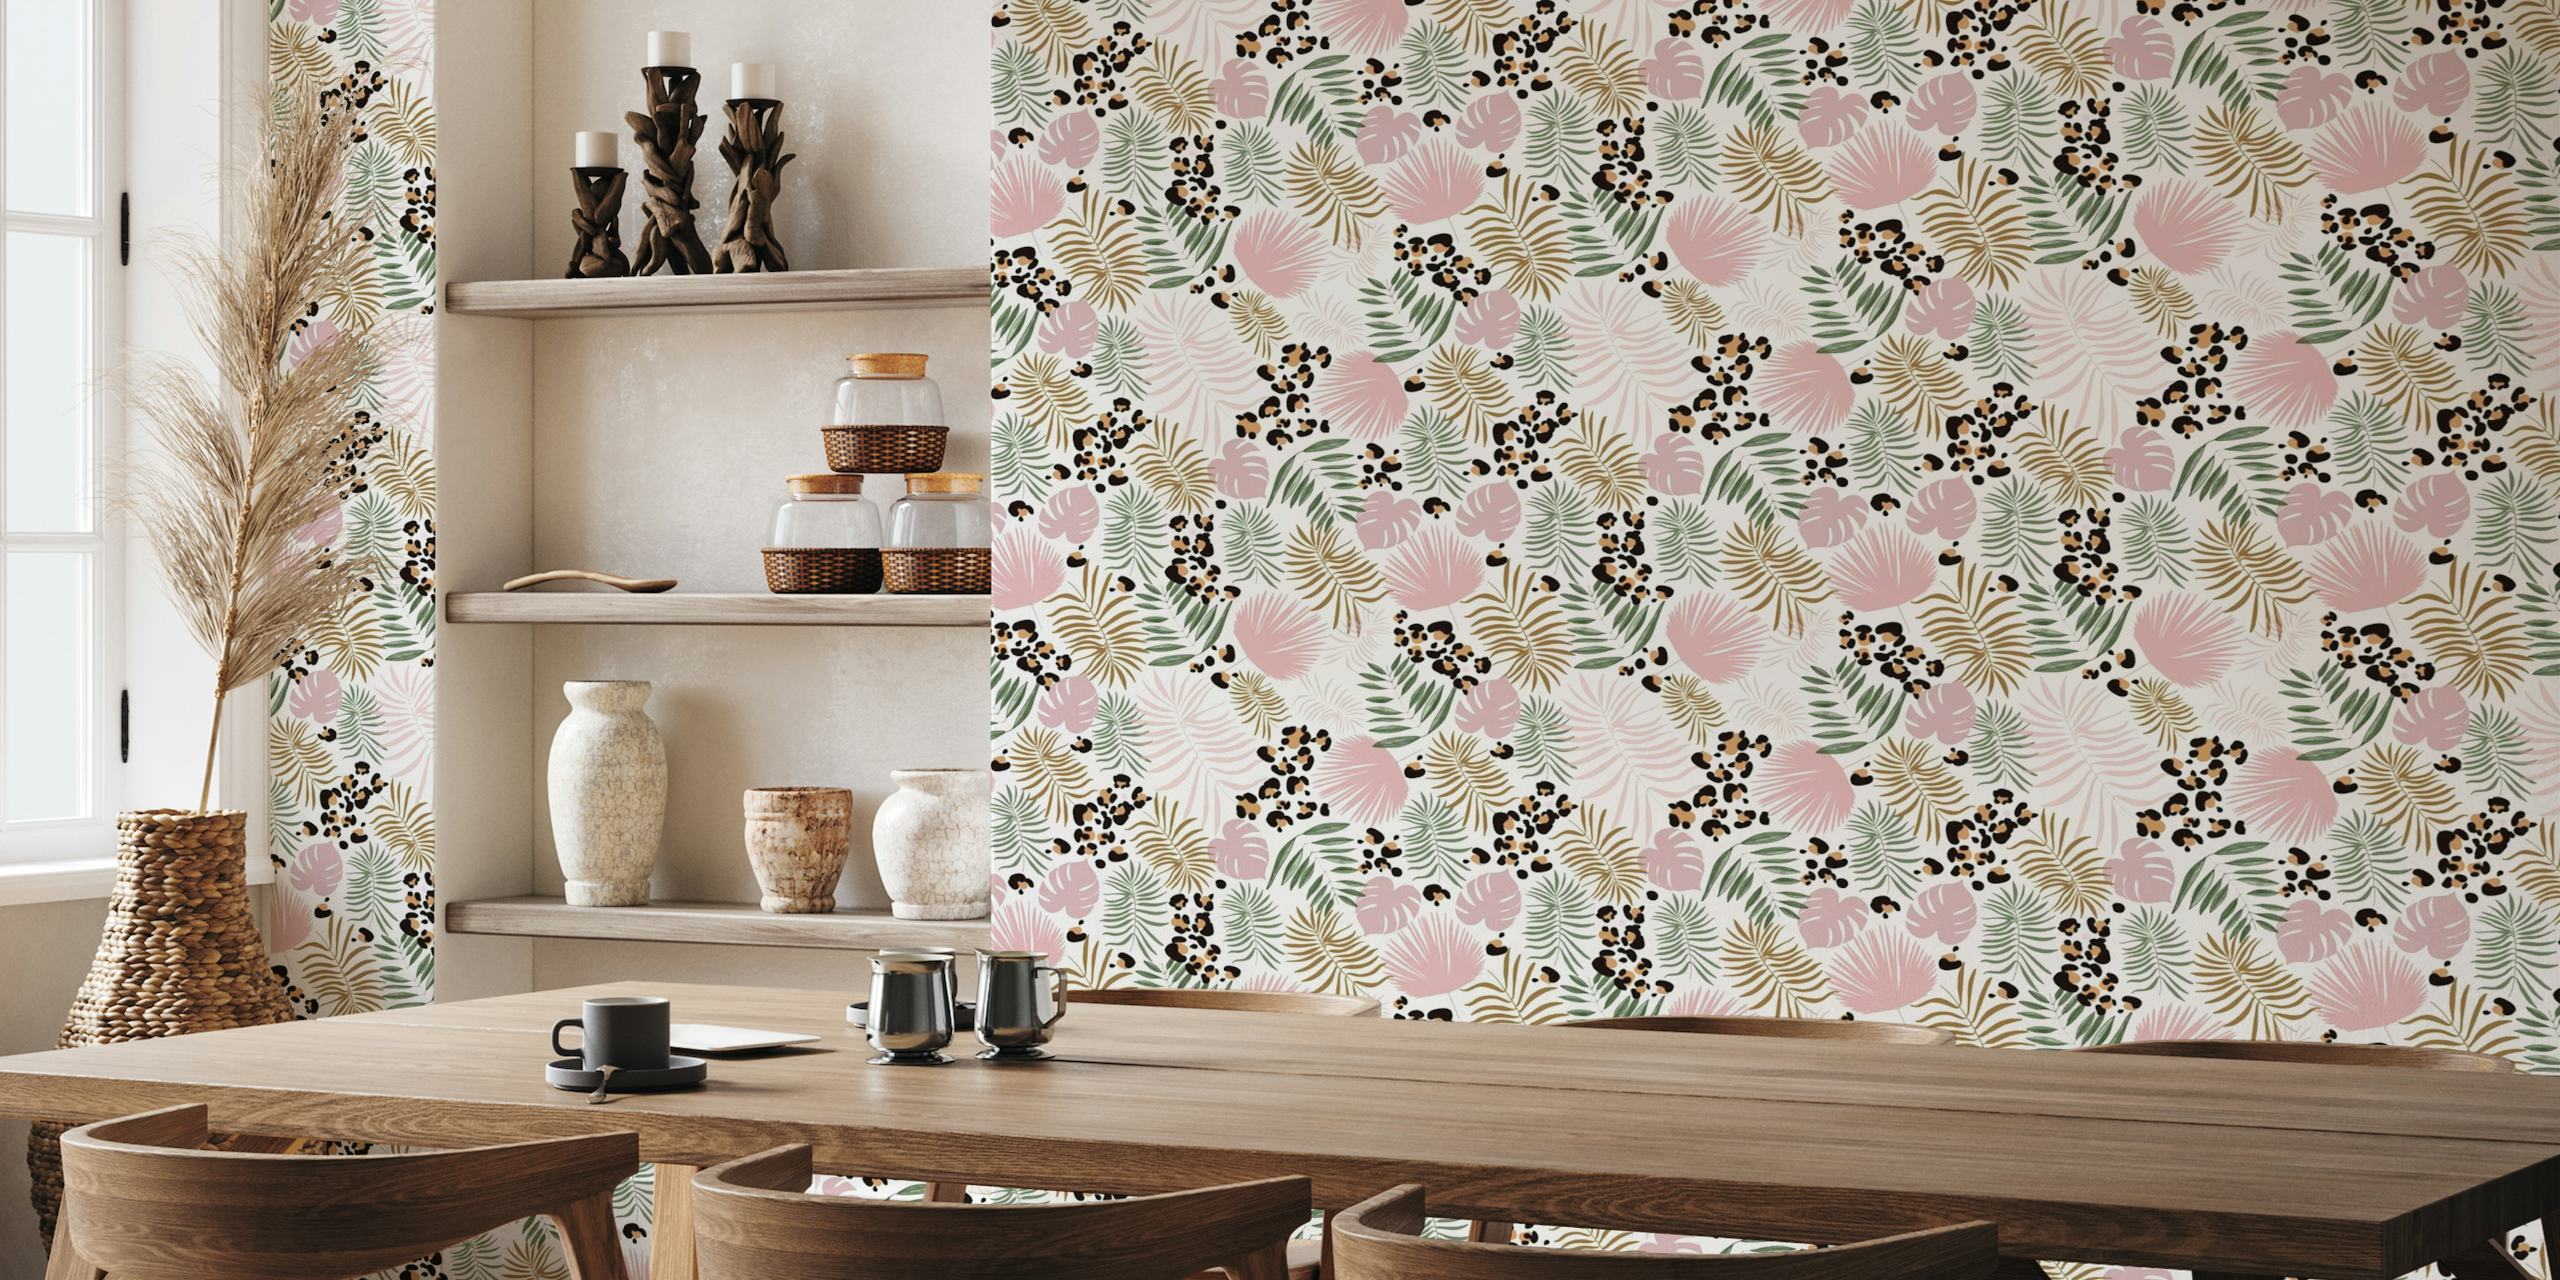 Leopard print with tropical pattern papel pintado